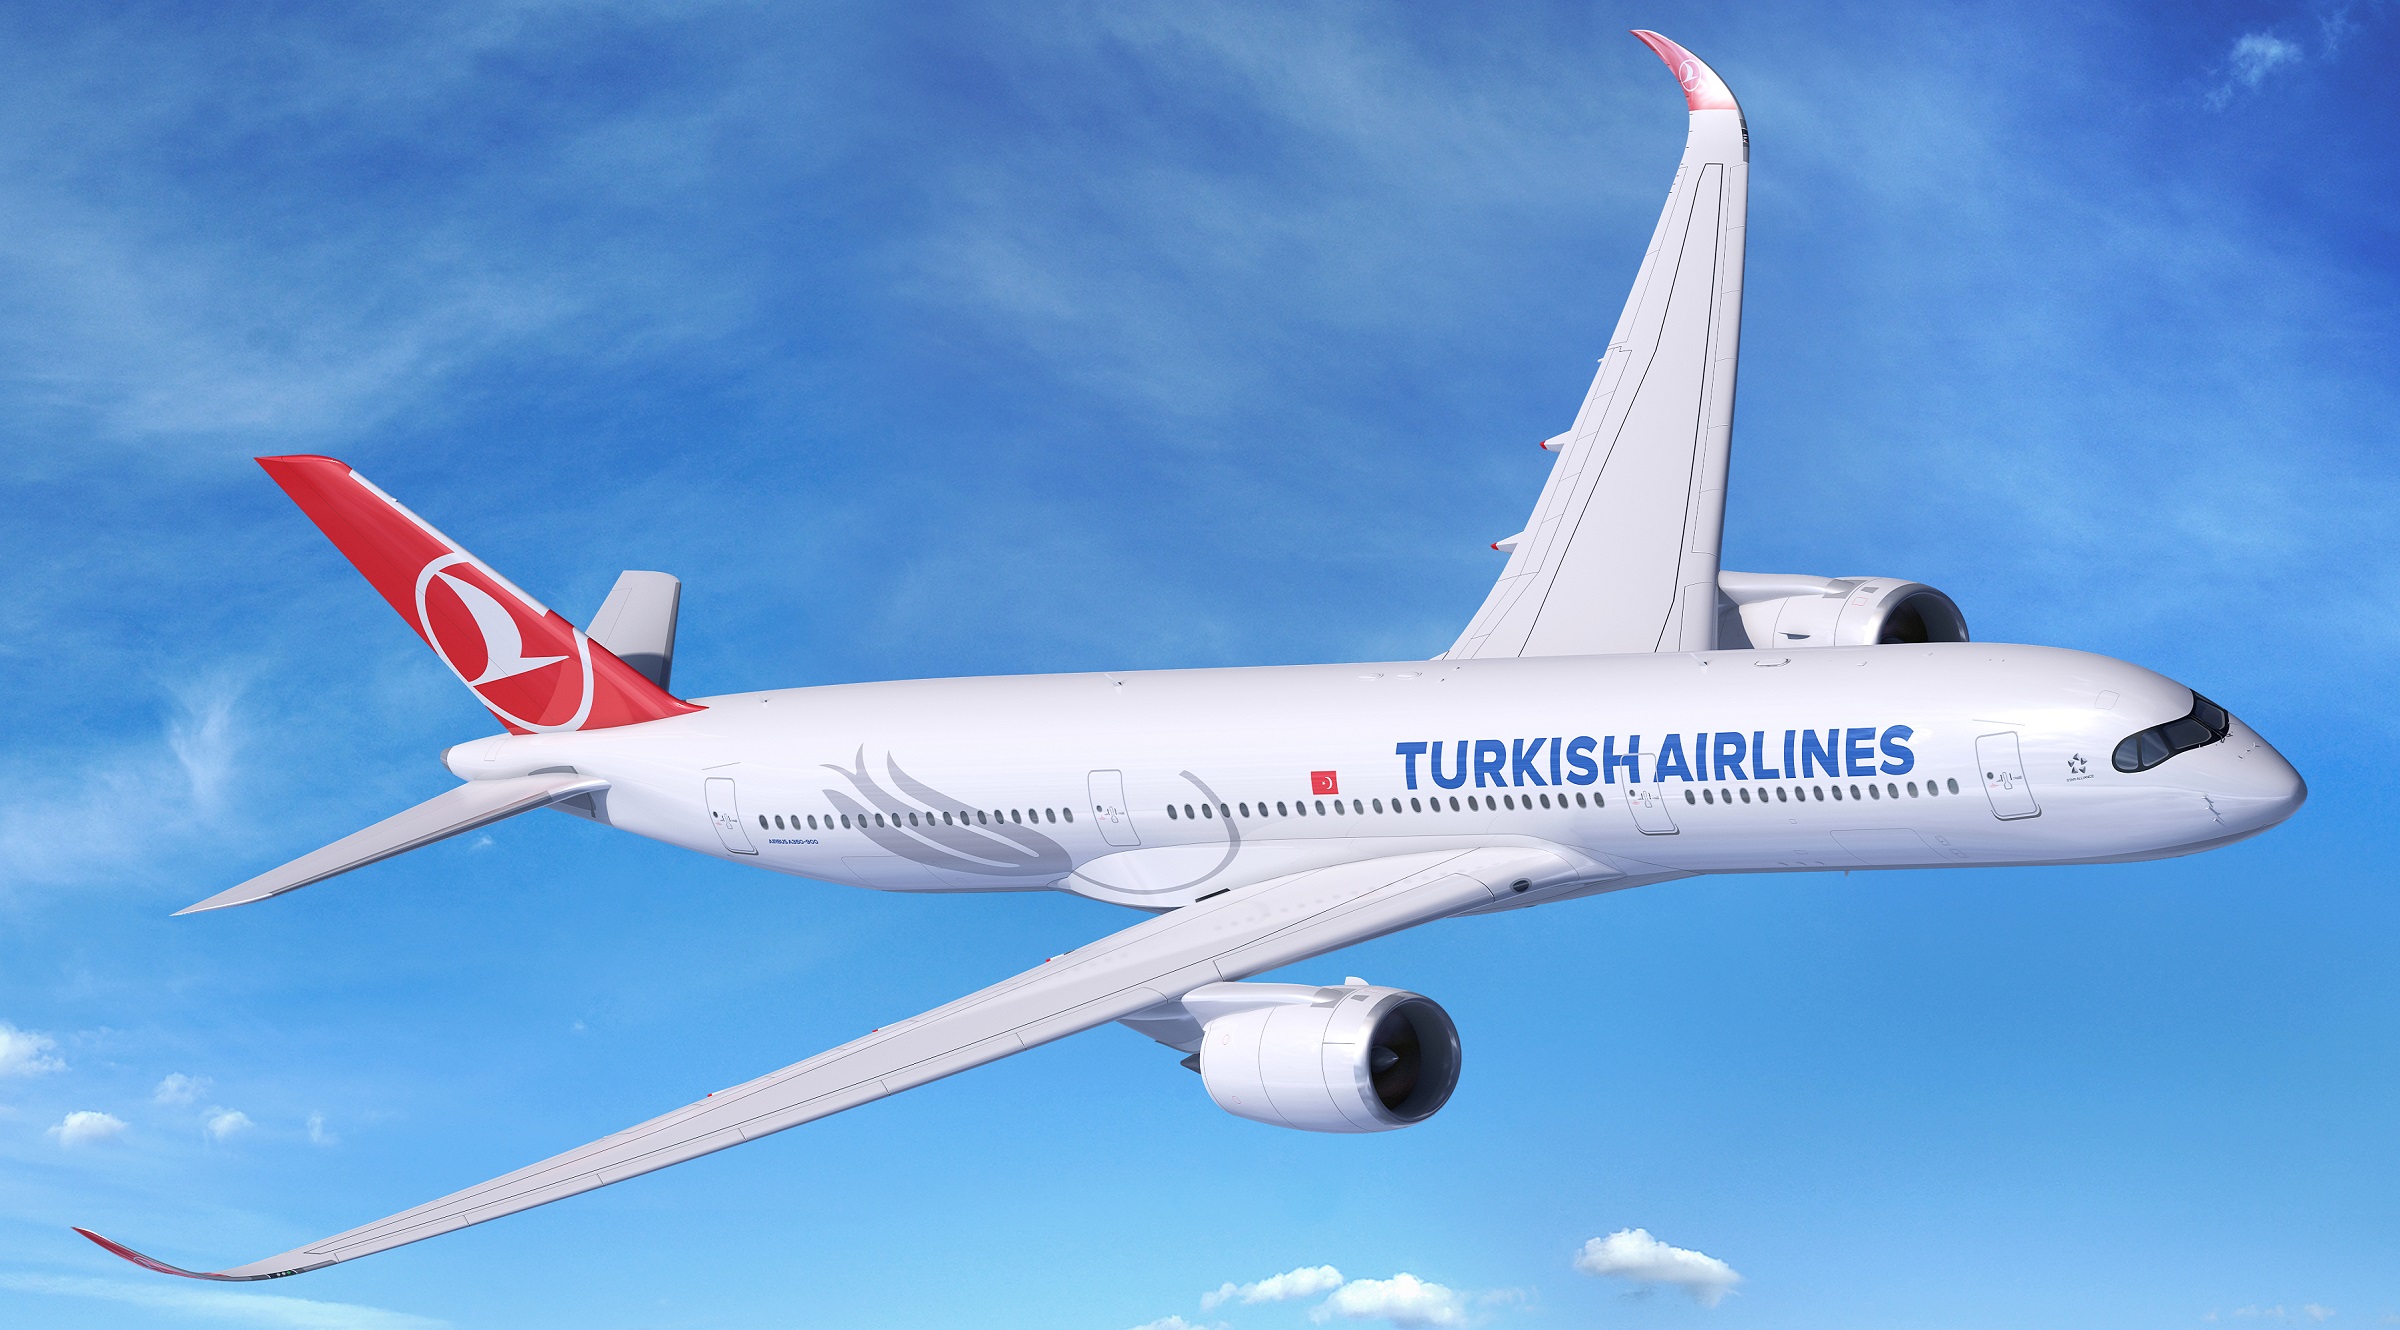 Turkish Airlines Introduces New In-Flight Messaging Service